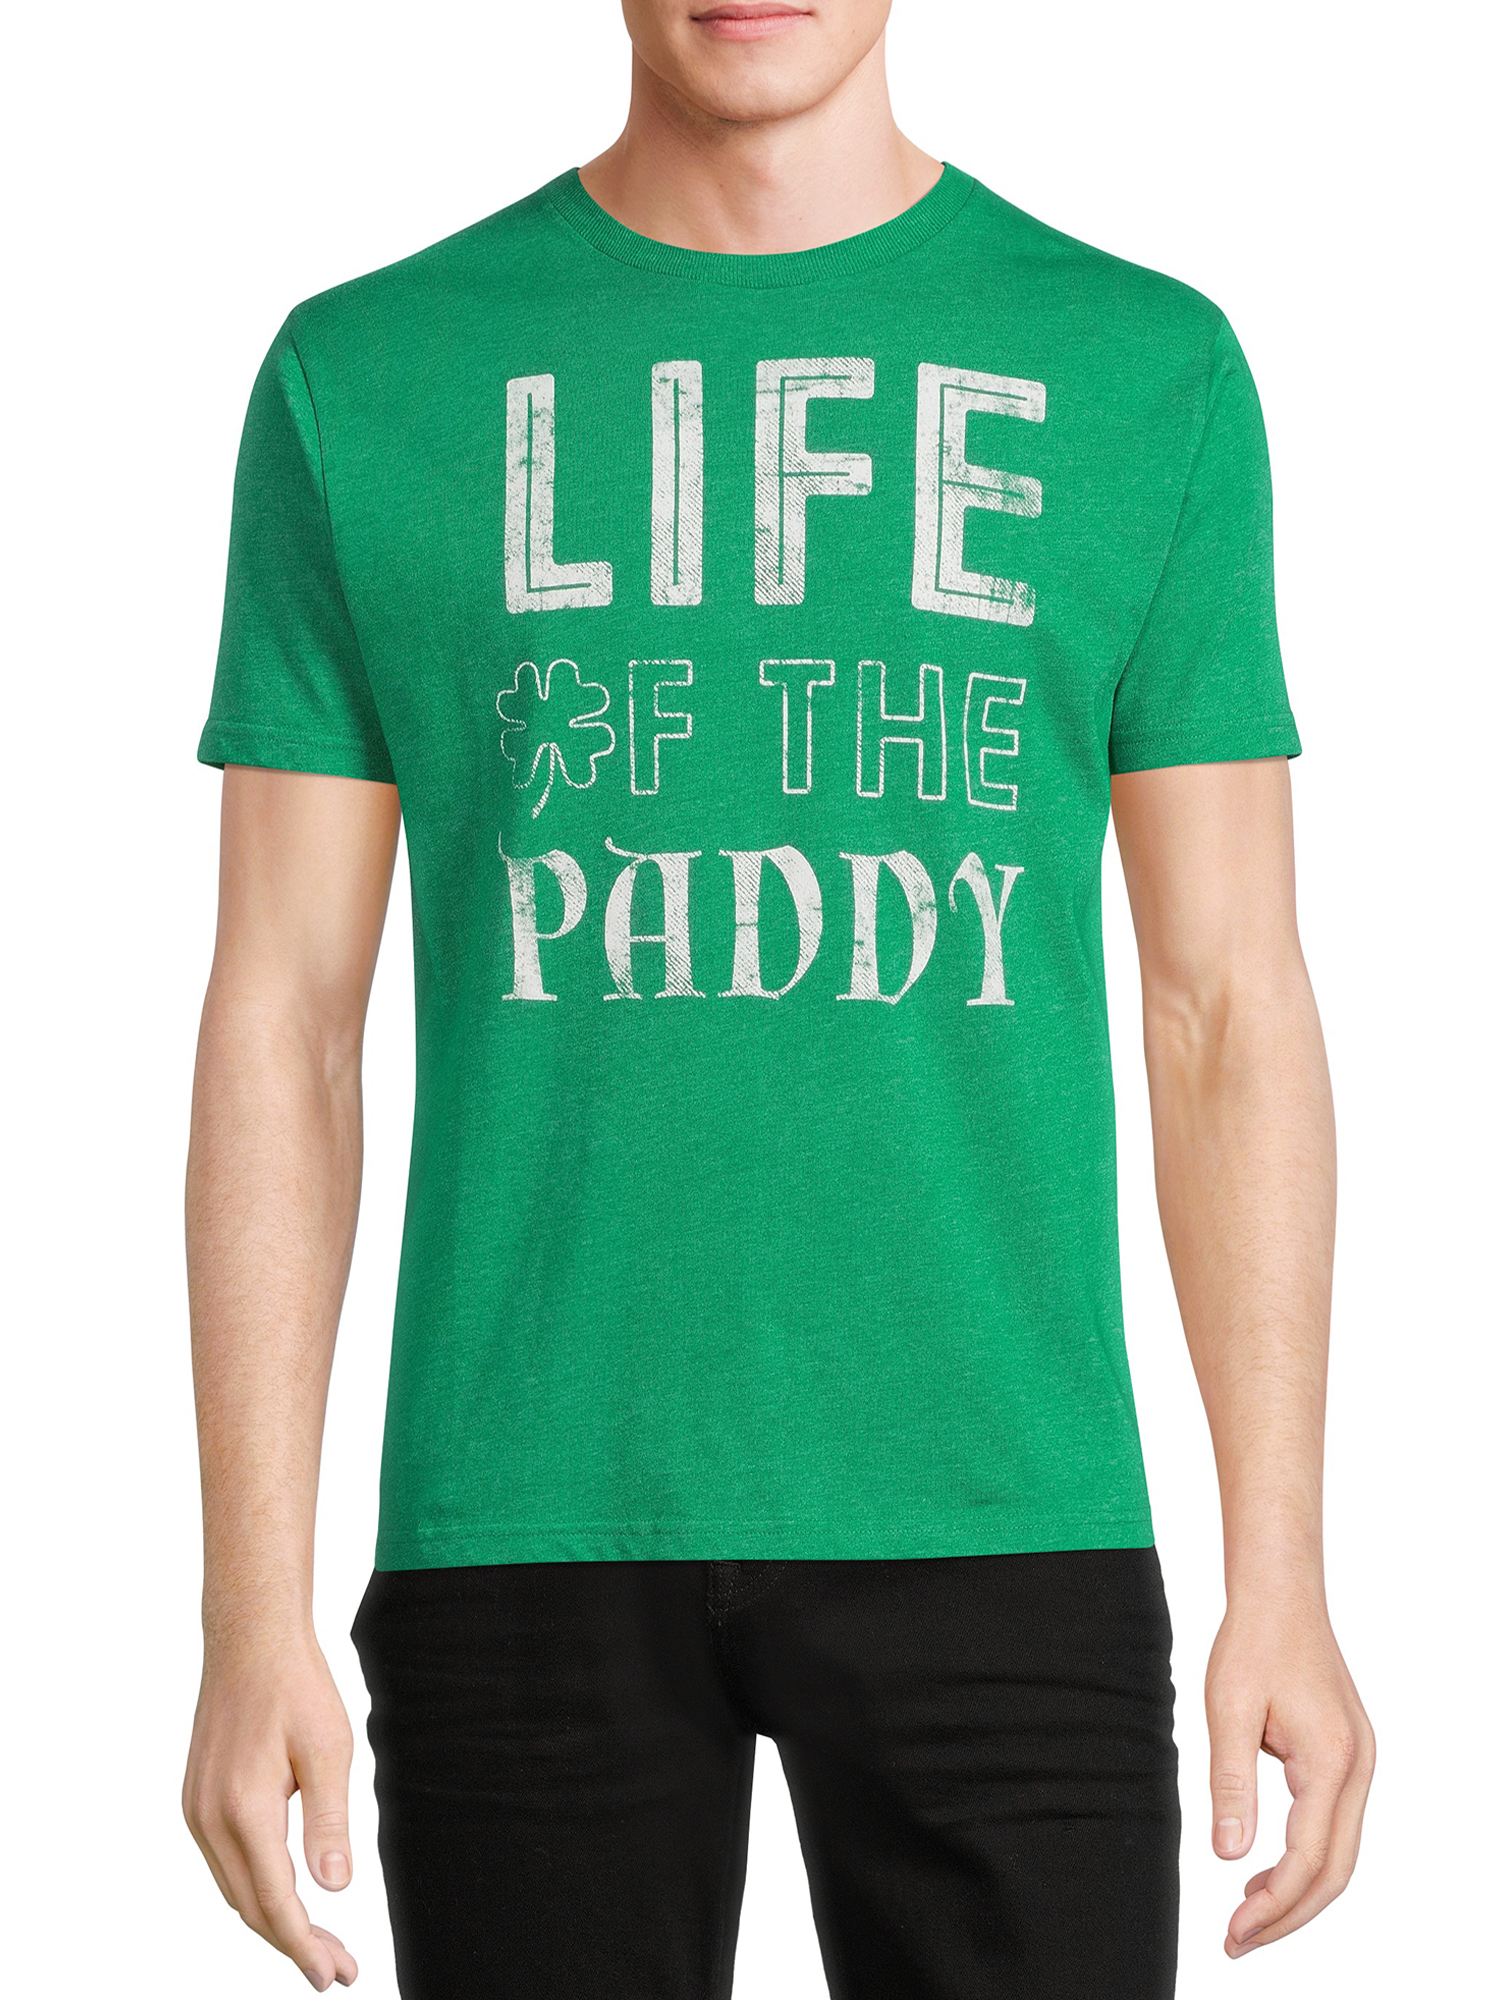 St. Patrick's Day Men's & Big Men's Life of the Paddy and Pinch Proof Graphic Tee Bundle, 2-Pack - image 4 of 6